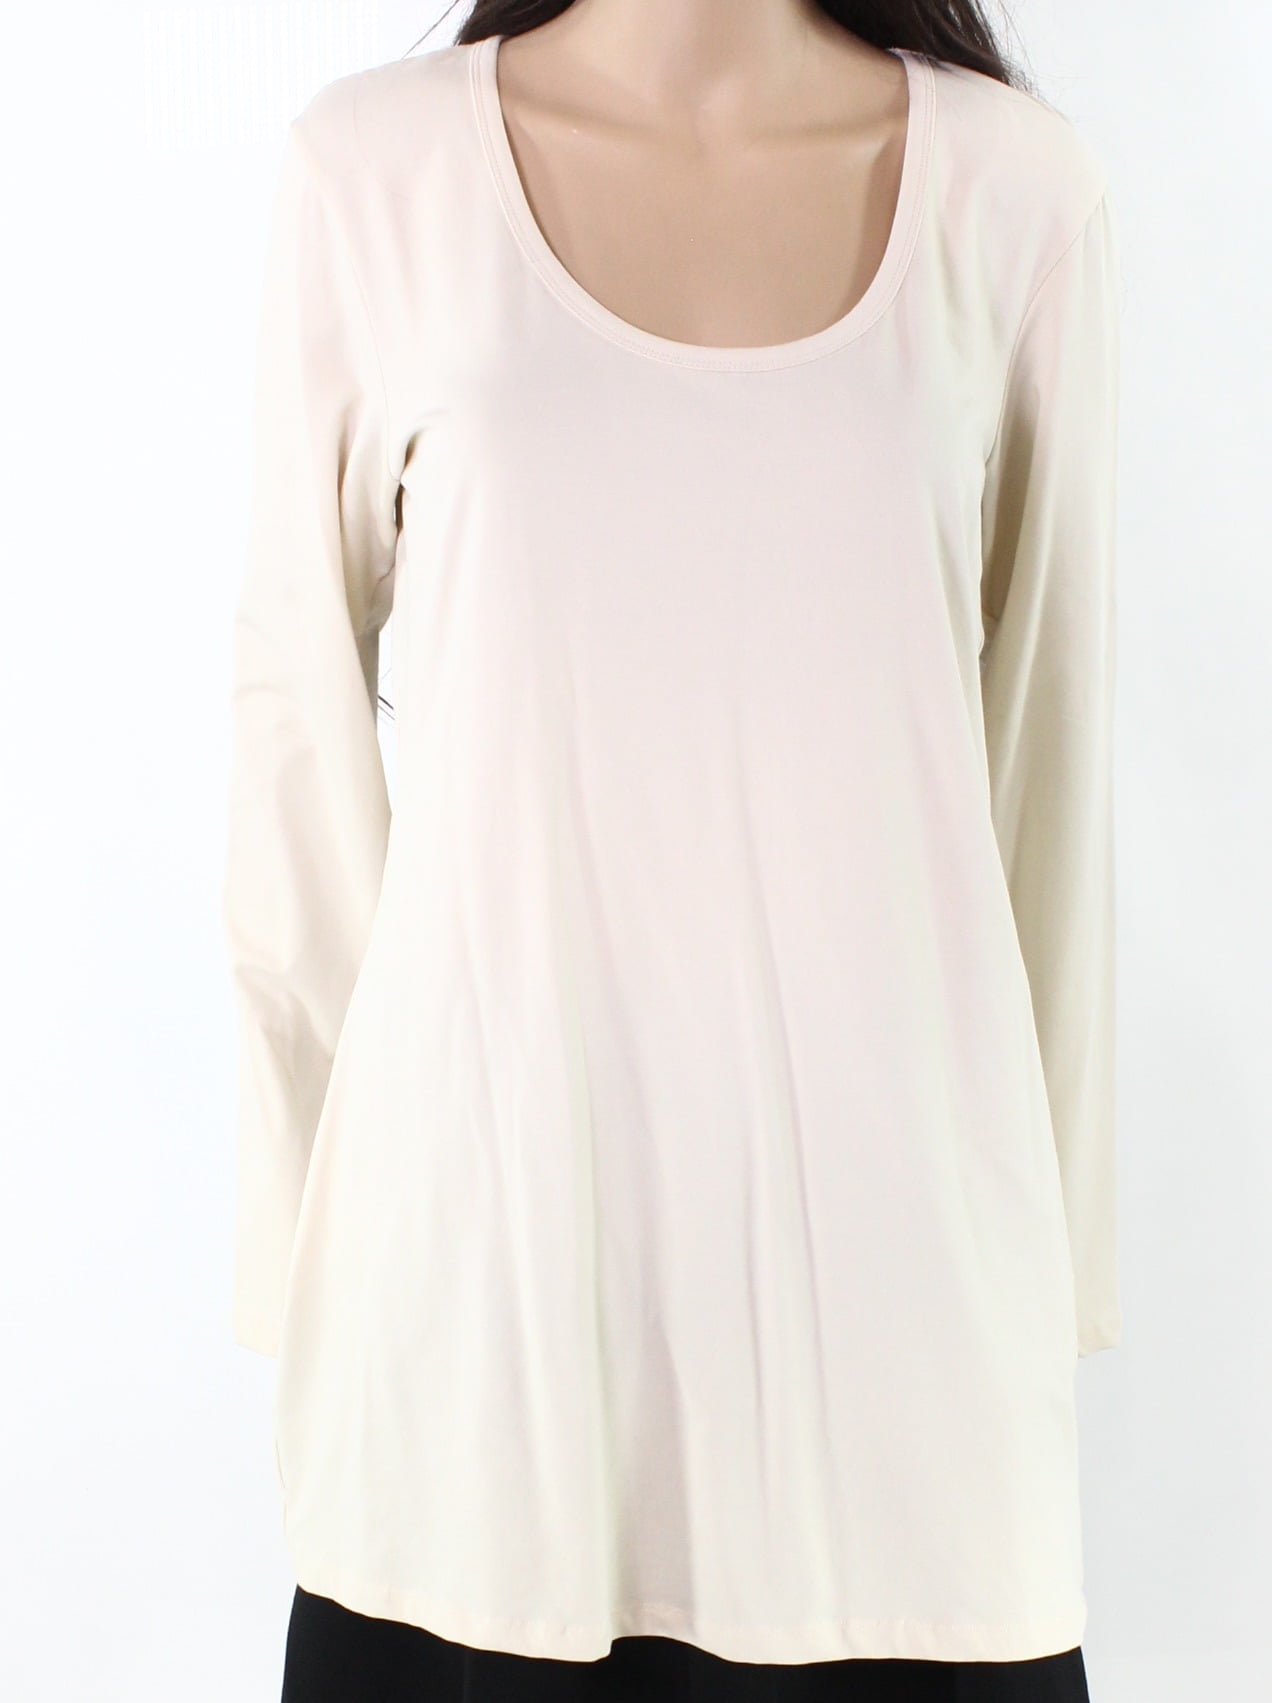 Yest - Yest NEW Beige Womens Size 14 Stretch Long Sleeve Scoop Neck Tee ...